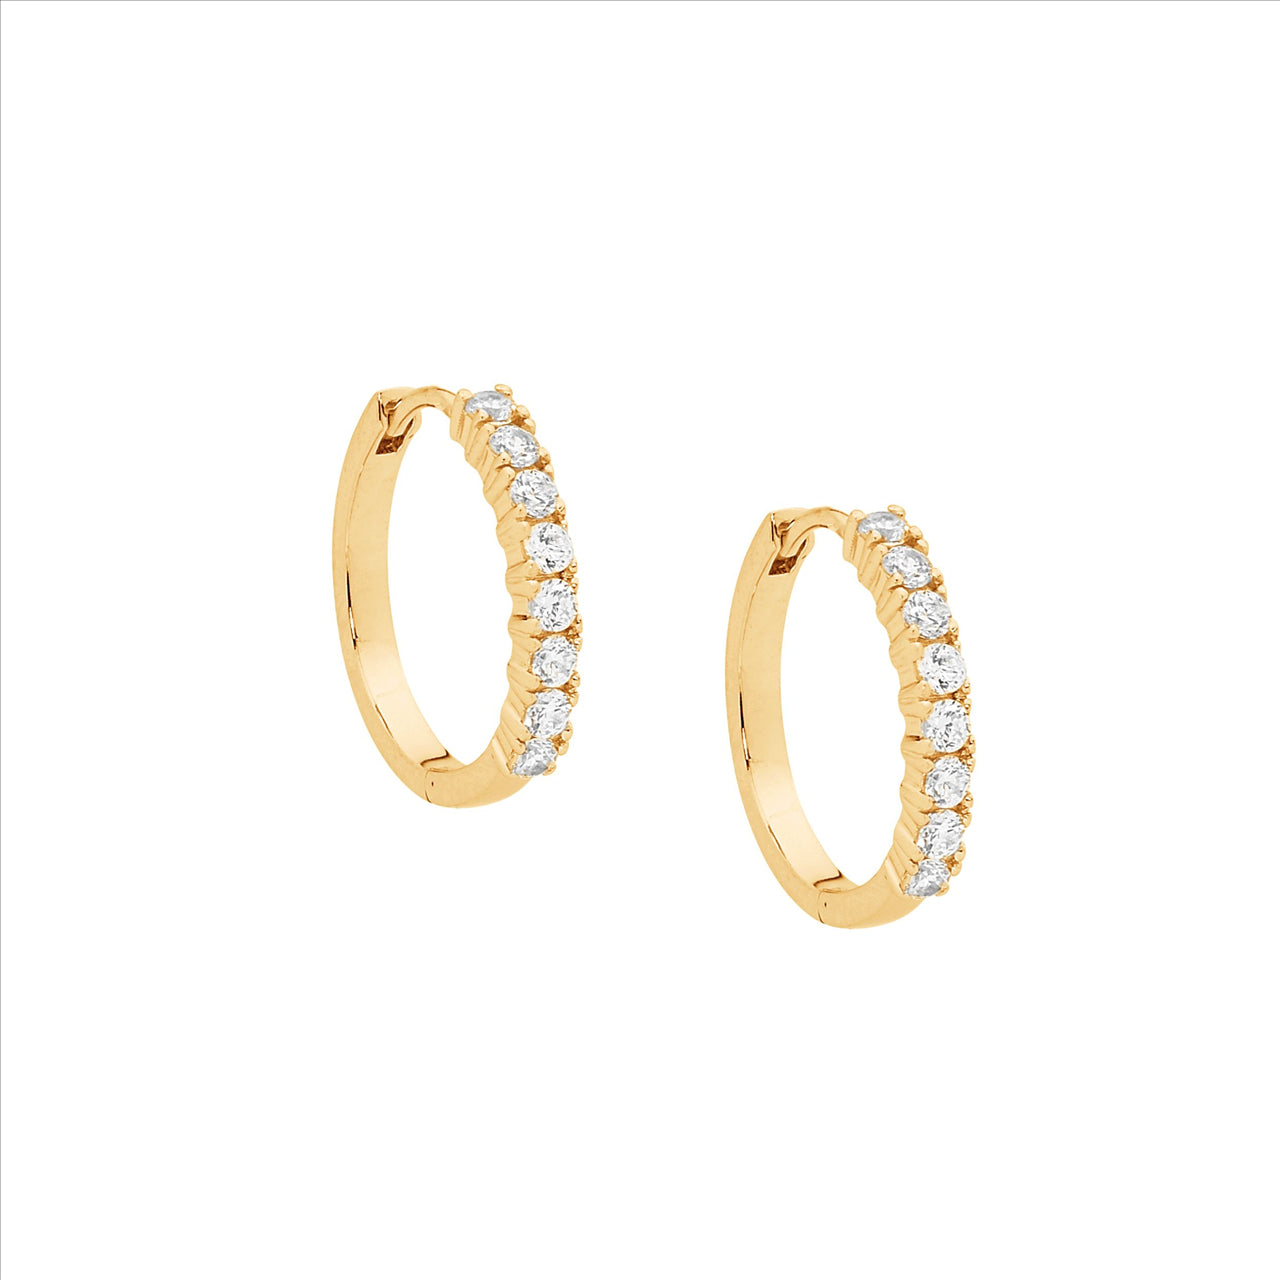 Sterling Silver Gold Plated Huggie Earrings With White Cubic Zirconias